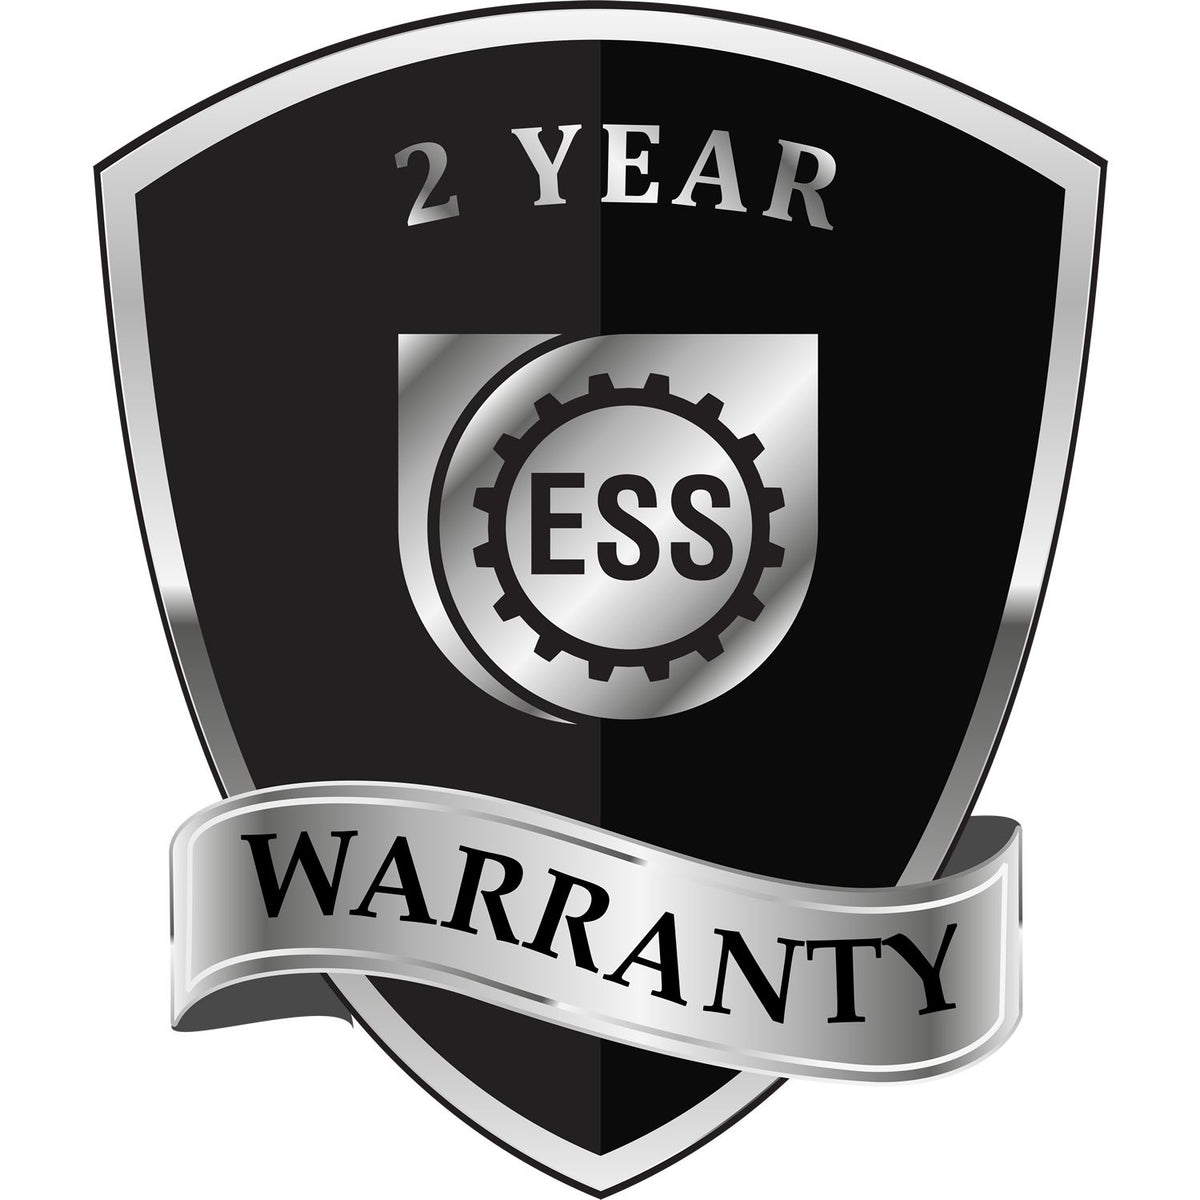 A black and silver badge or emblem showing warranty information for the Gift Indiana Geologist Seal